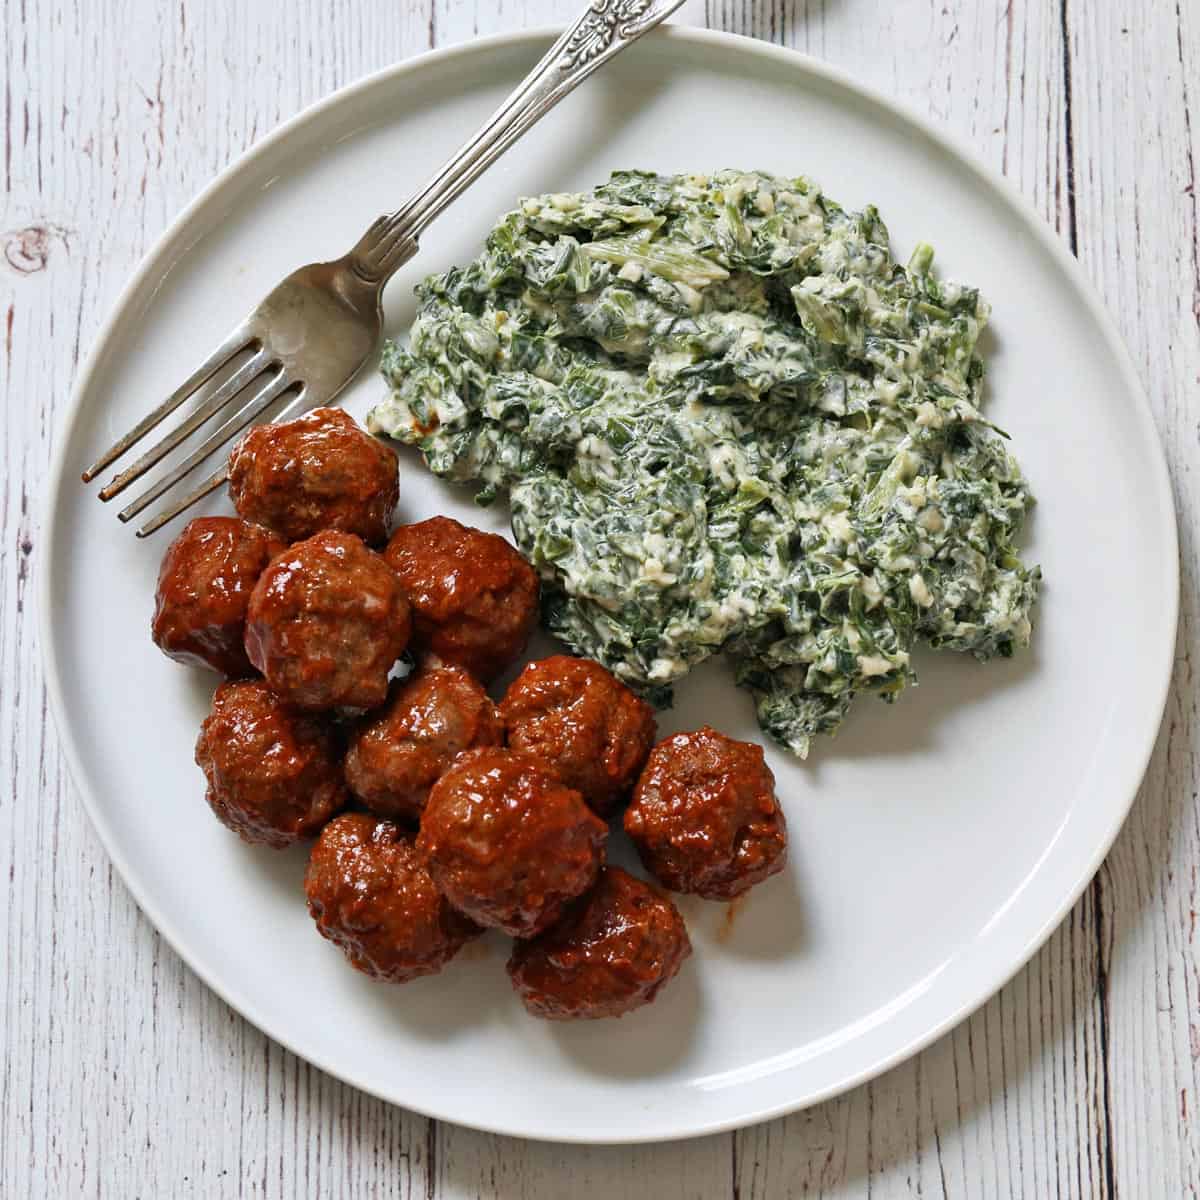 Cocktail meatballs are served with creamed spinach.